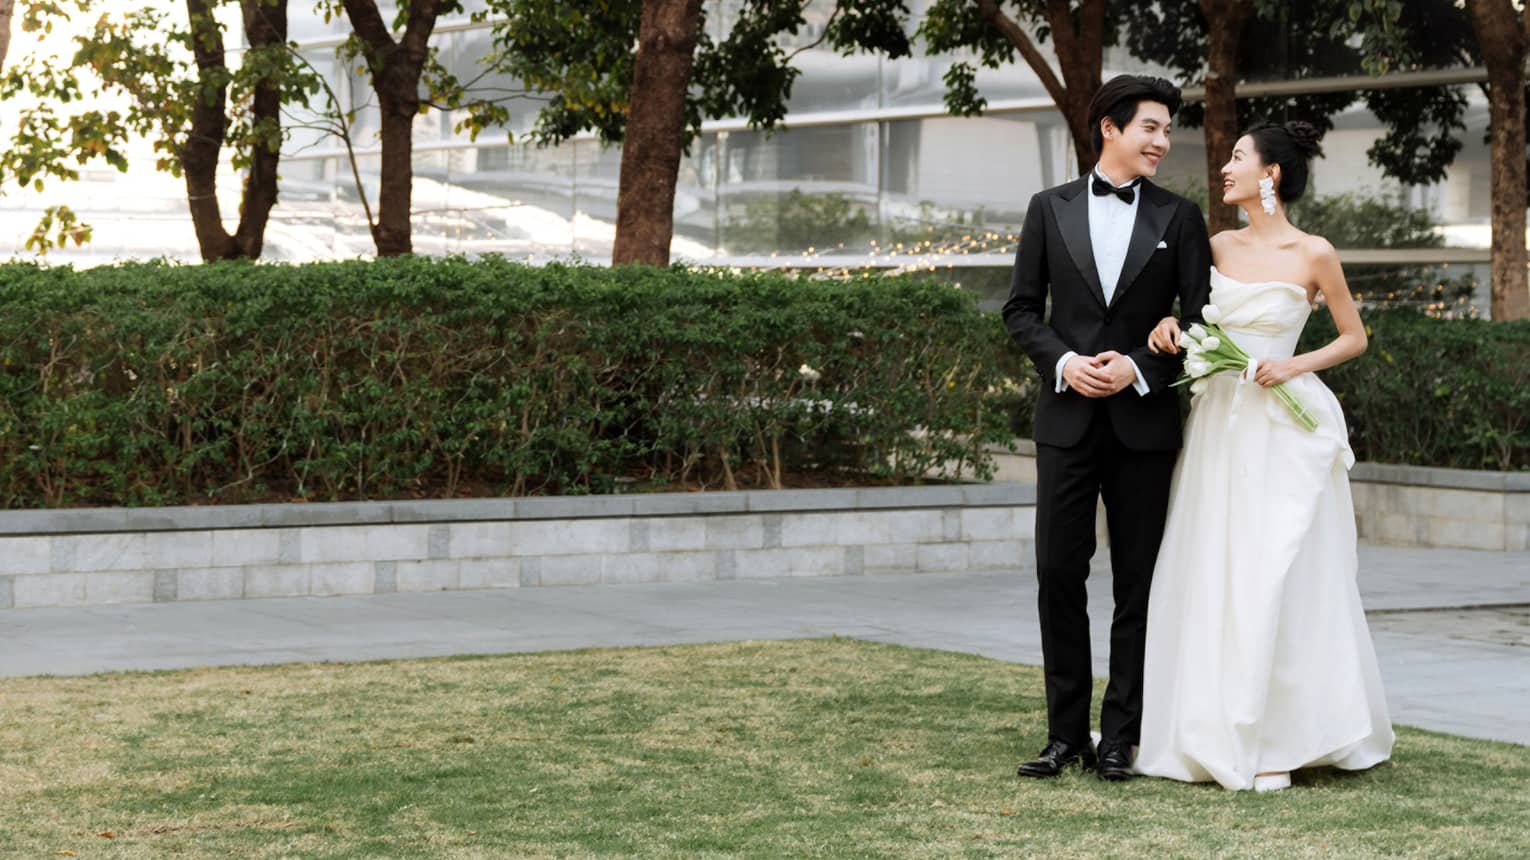 Bride and groom stand on outdoor terrace flanked by trees